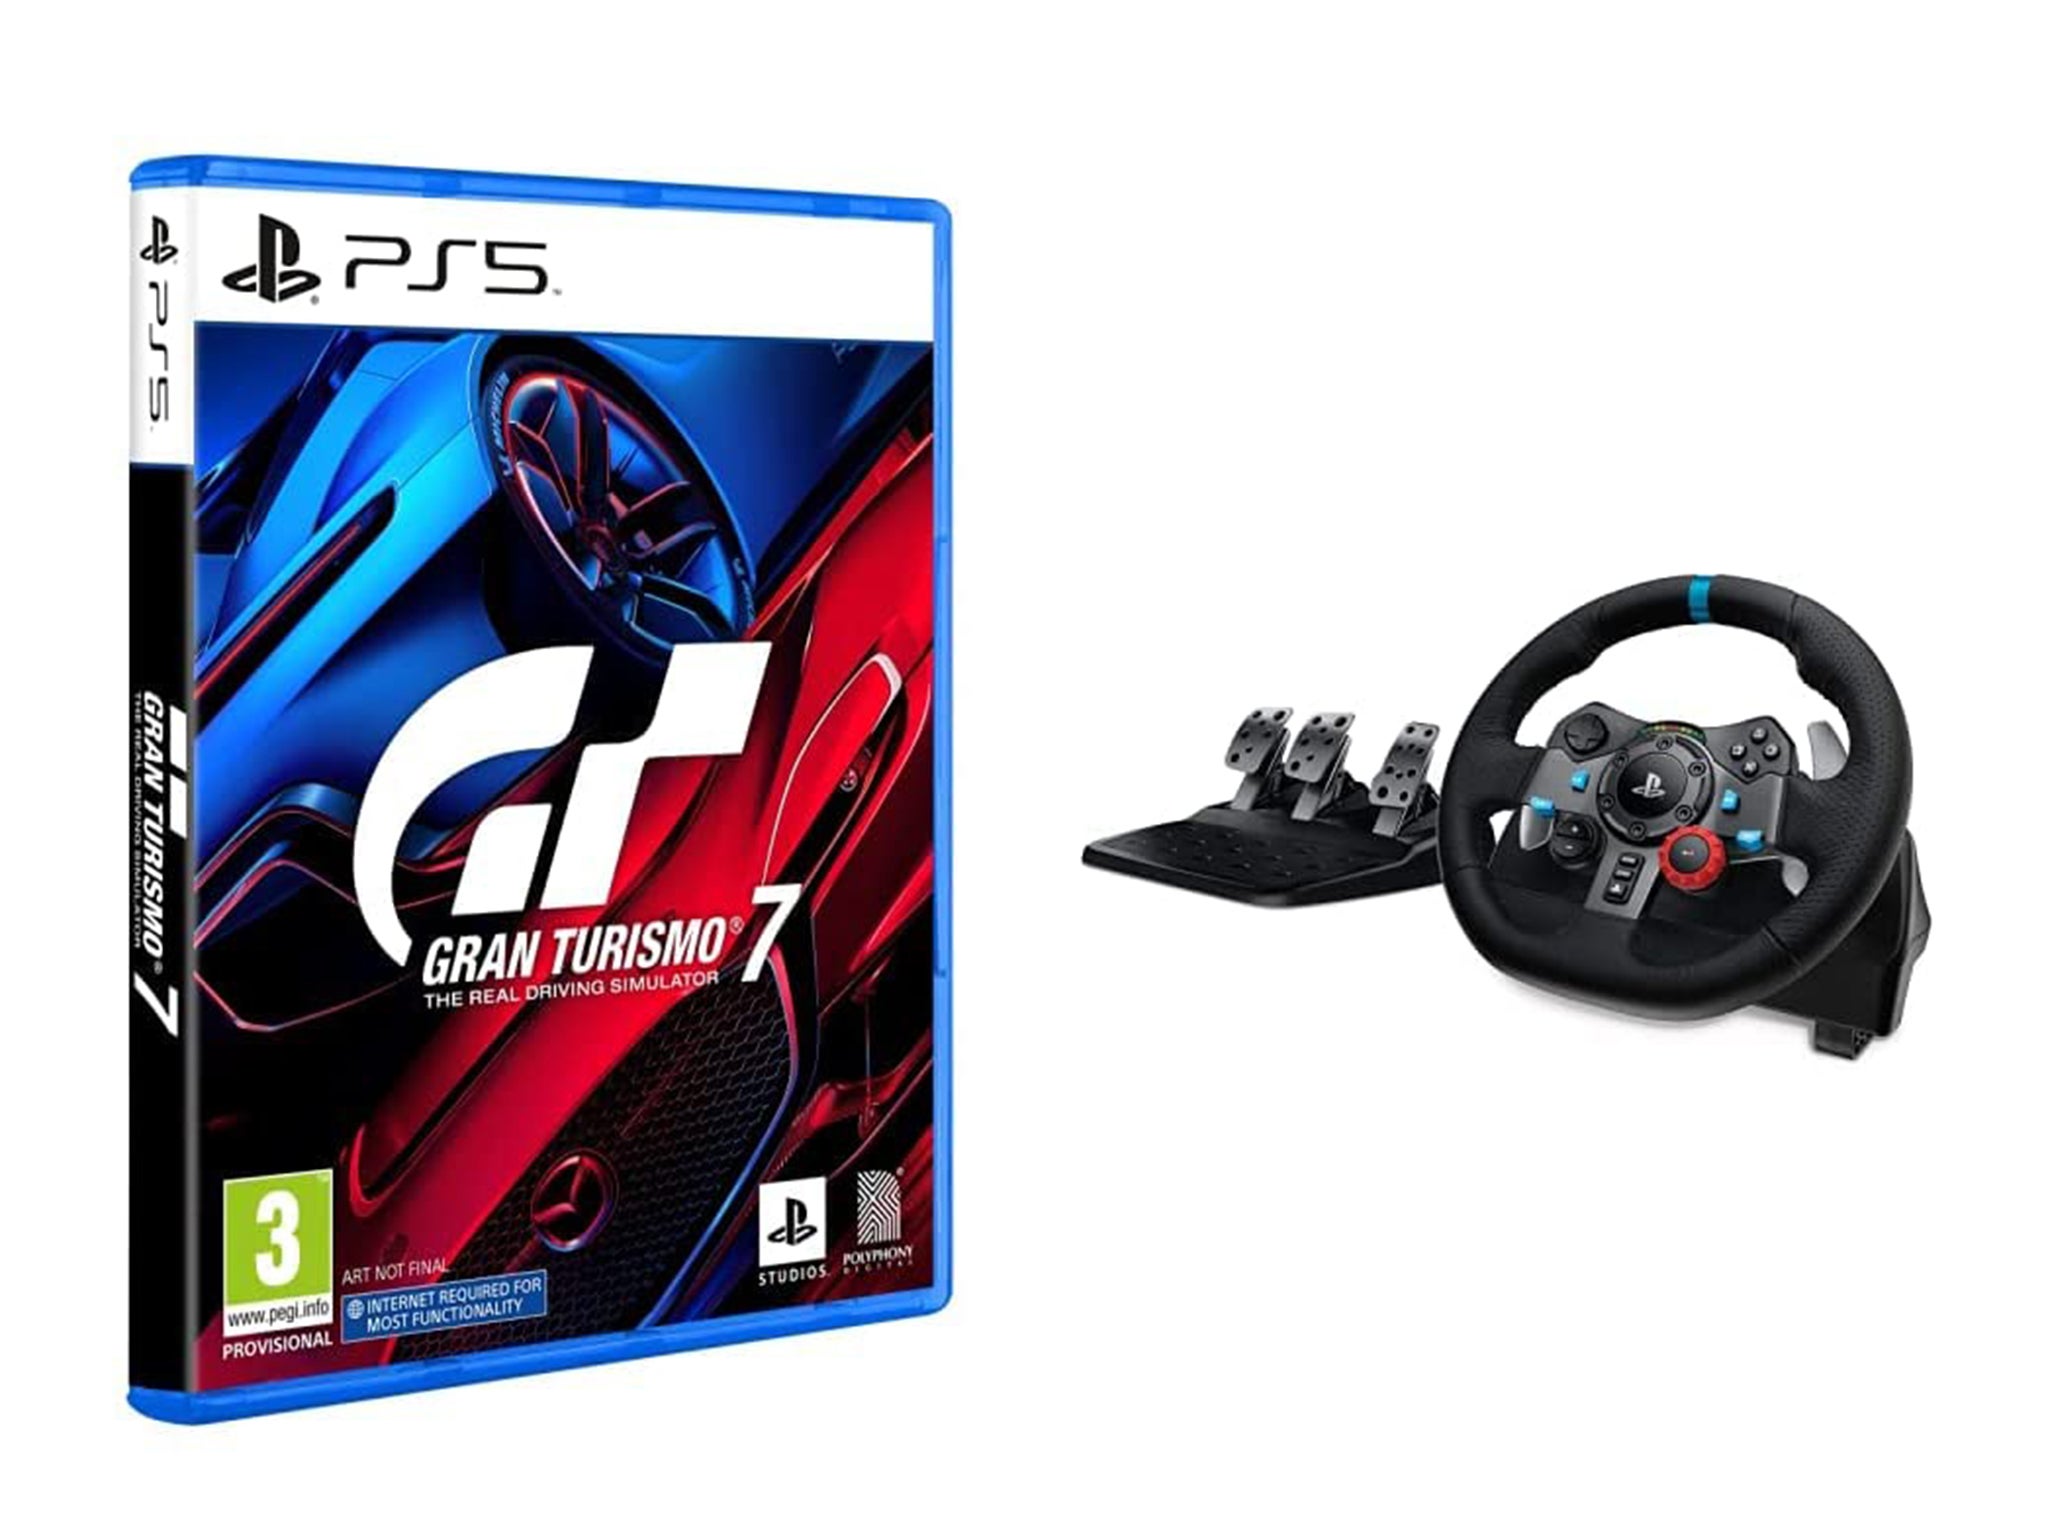 How to buy a PS5 to get great games like GTA 5, Gran Turismo 7 and